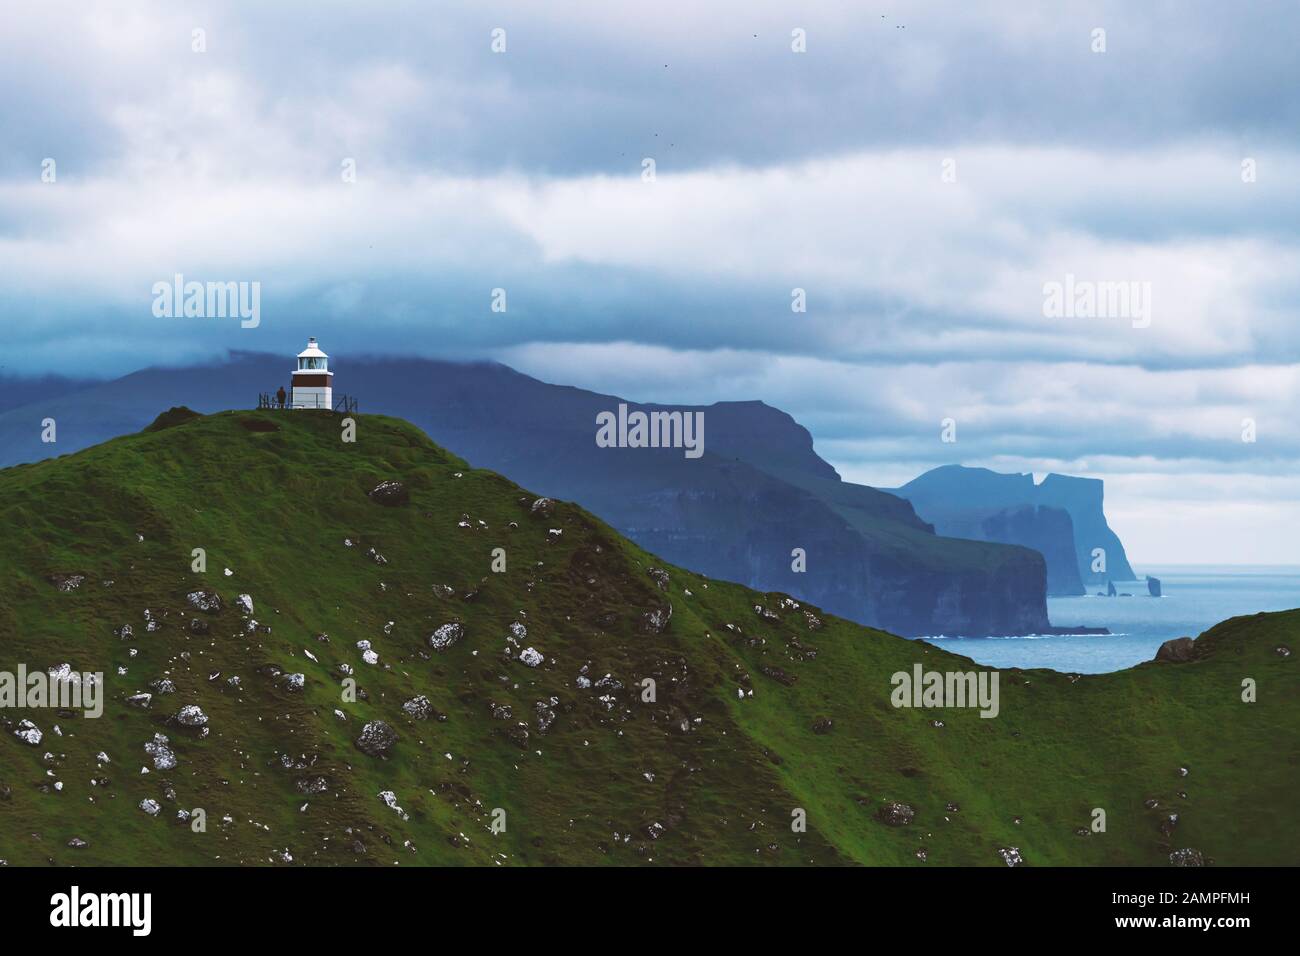 Panorama with Kallur lighthouse on green hills of Kalsoy island, Faroe islands, Denmark. Landscape photography Stock Photo